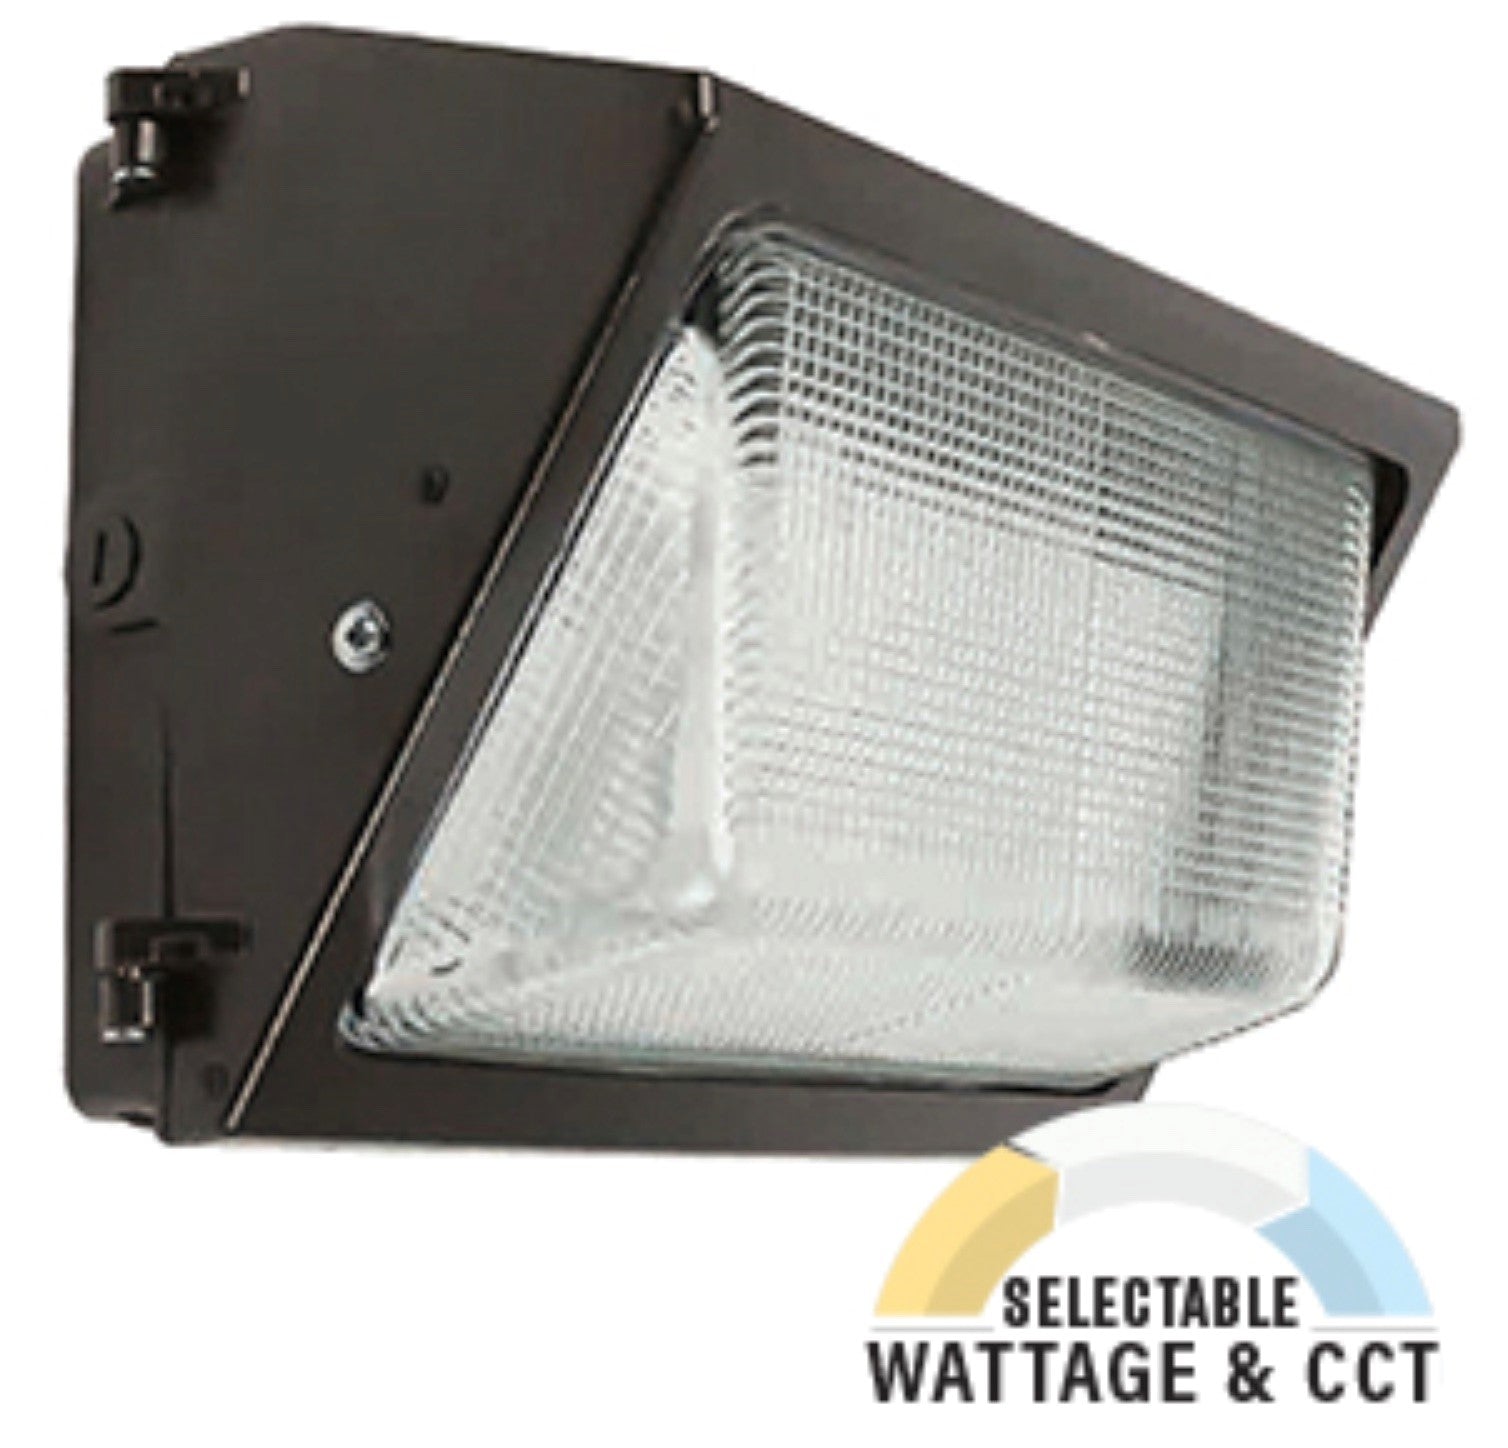 LED Wall Pack, 40W/50W/60W, Selectable Wattage & CCT, 7500 Lumens